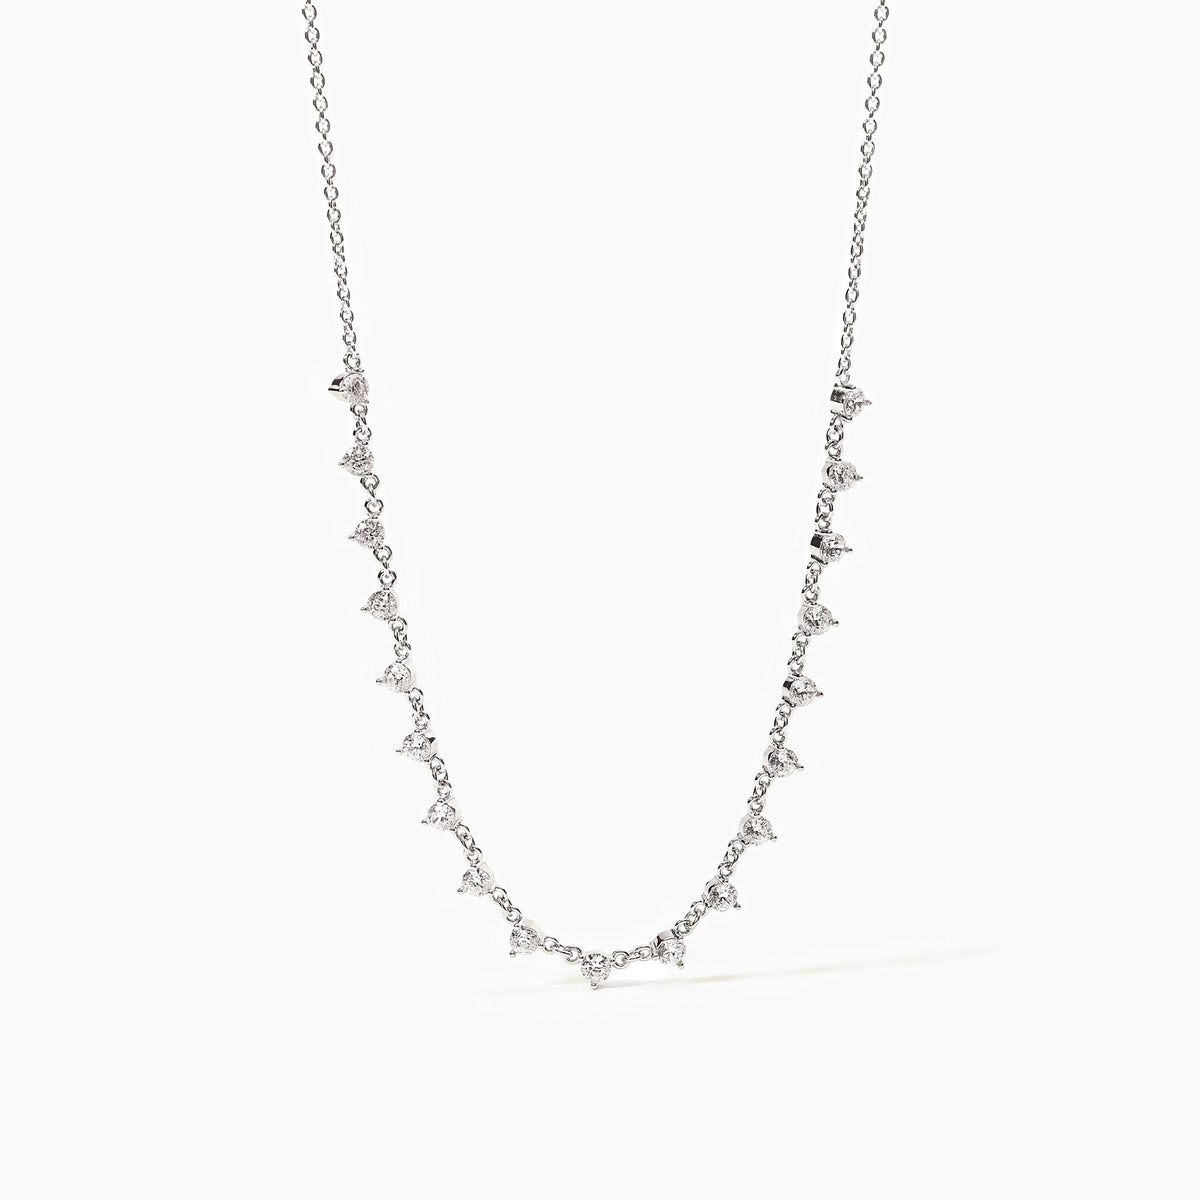 Mabina Necklace in Silver 553217